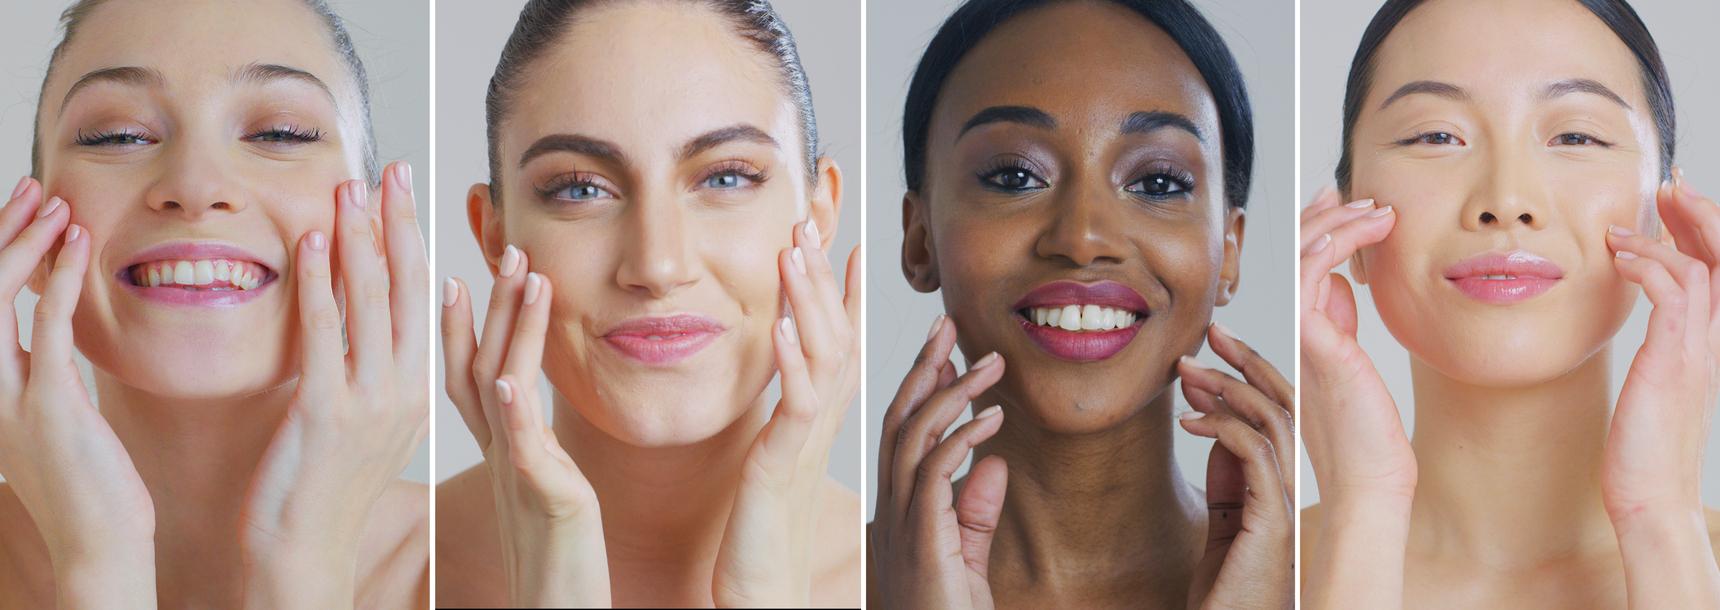 Dry? Sensitive? Oily? These Medical Skin Care Pros Share How To Determine And Treat Your Skin Type